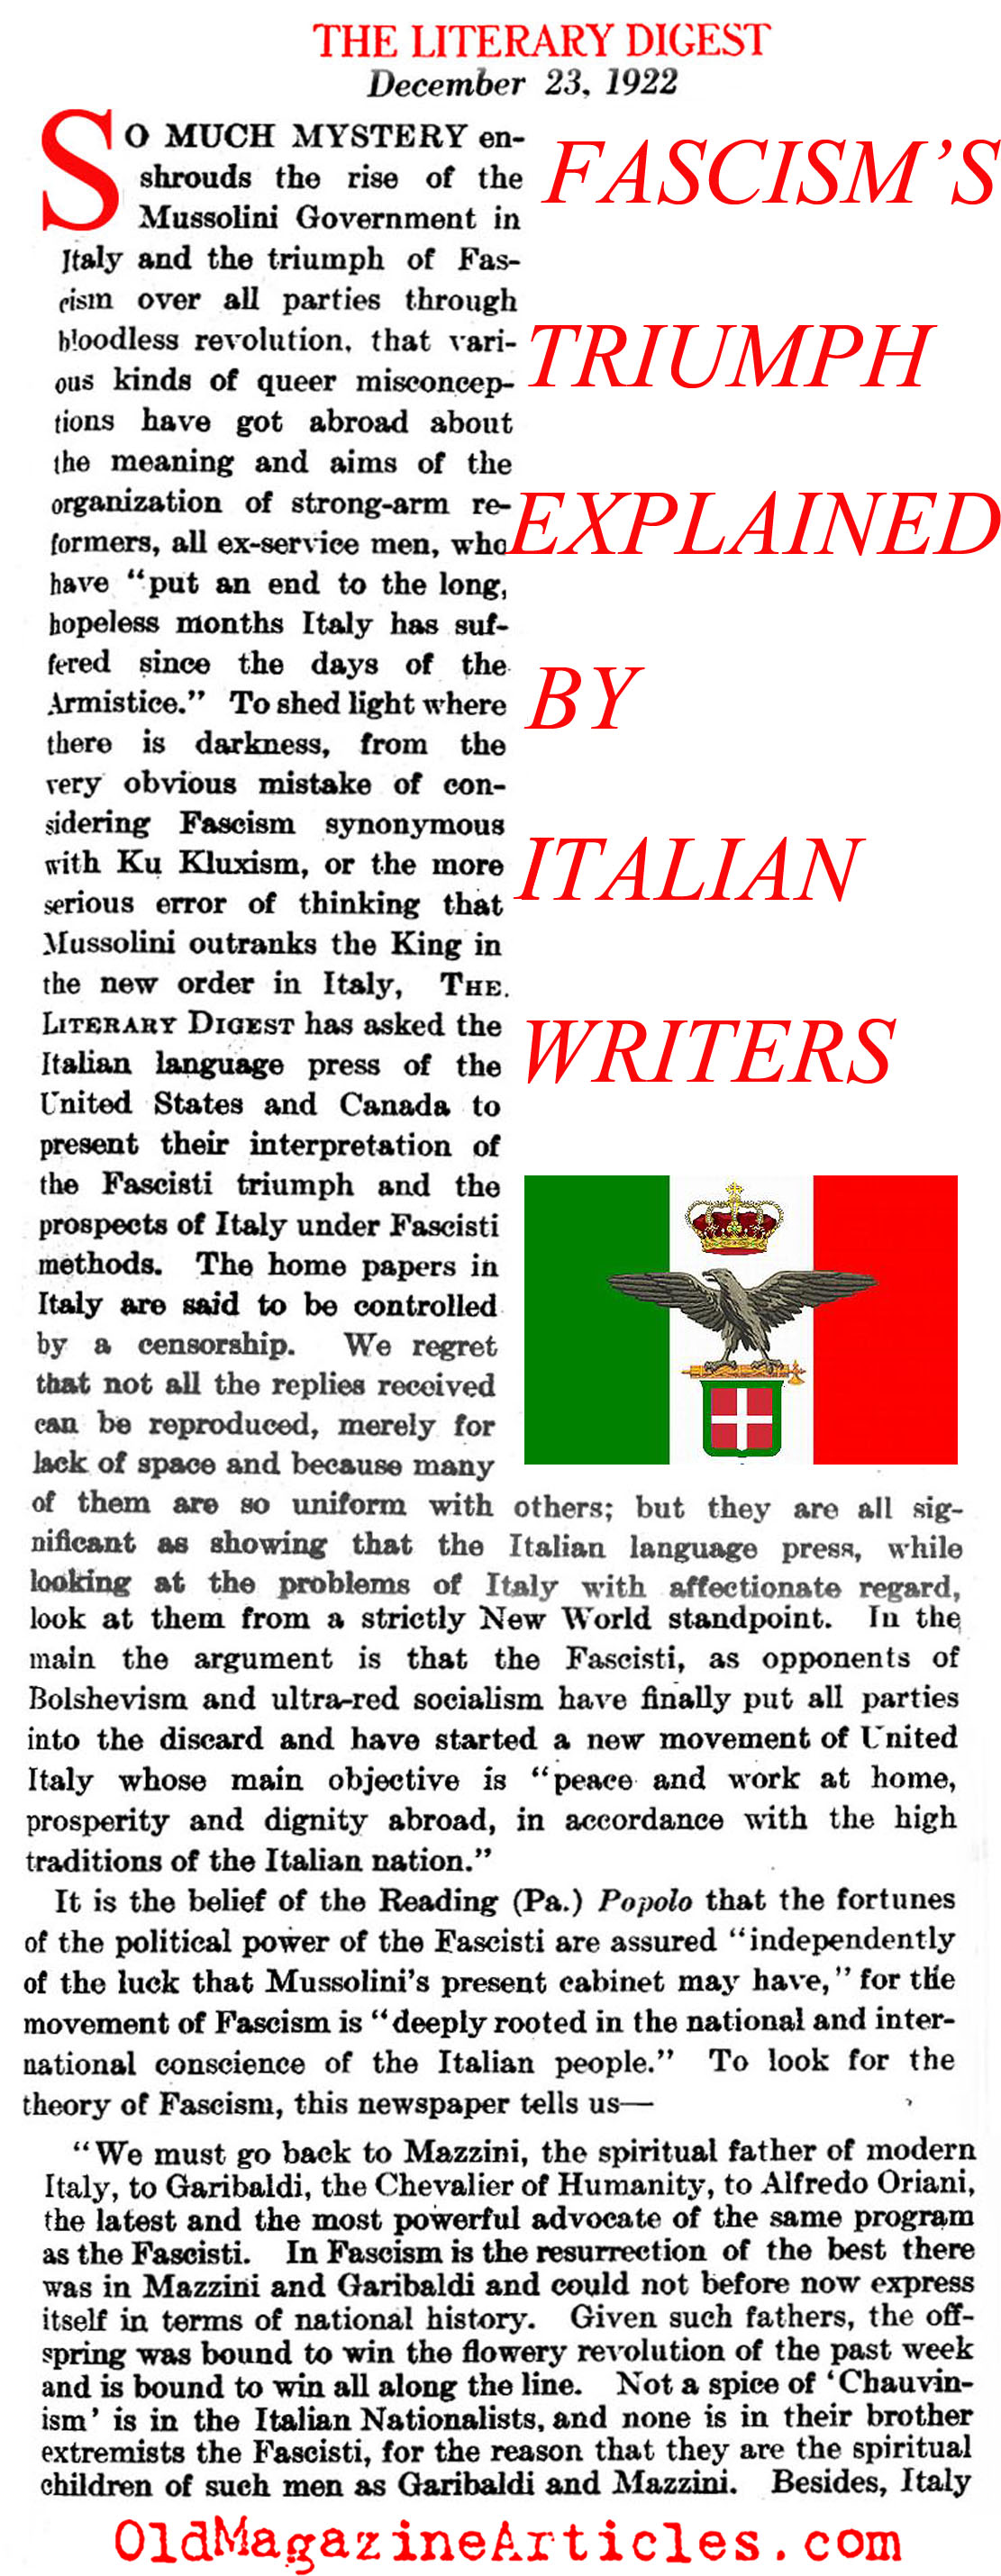 Fascism's Triumph Explained by Italian-American Journalists (Literary Digest, 1922)